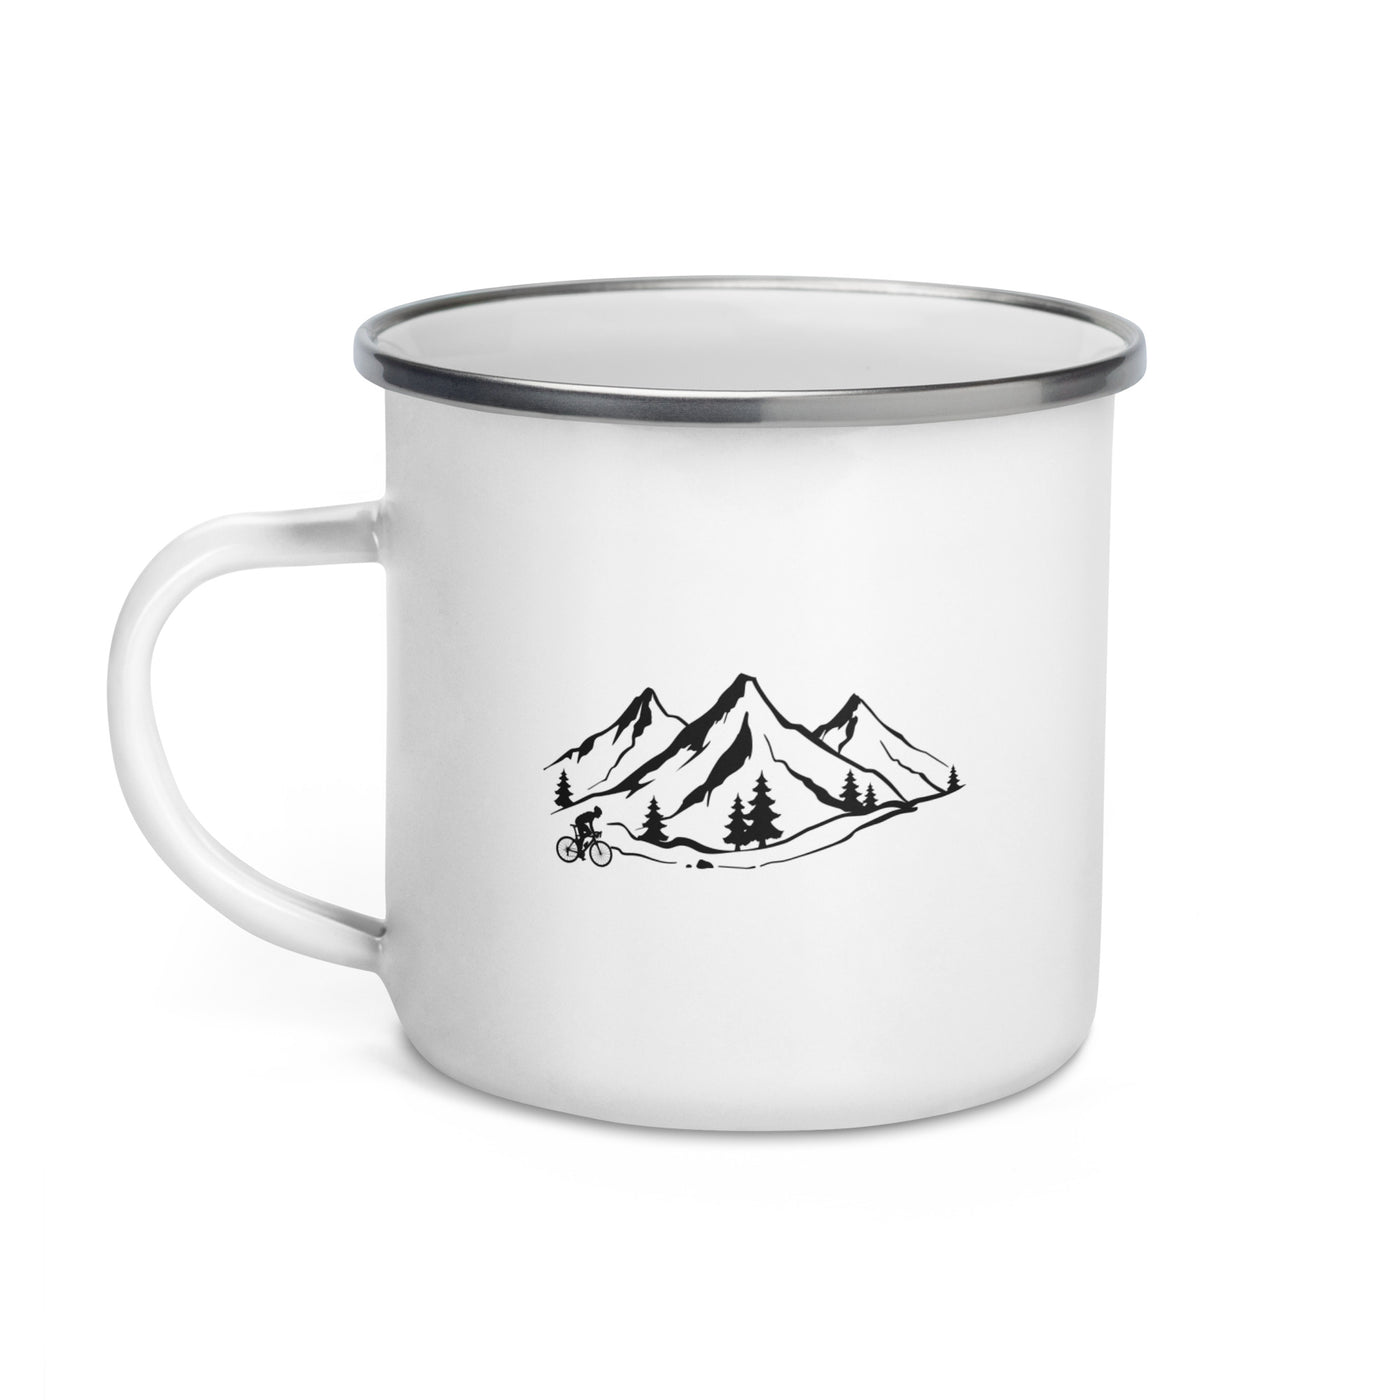 Mountain 1 And Cycling - Emaille Tasse fahrrad